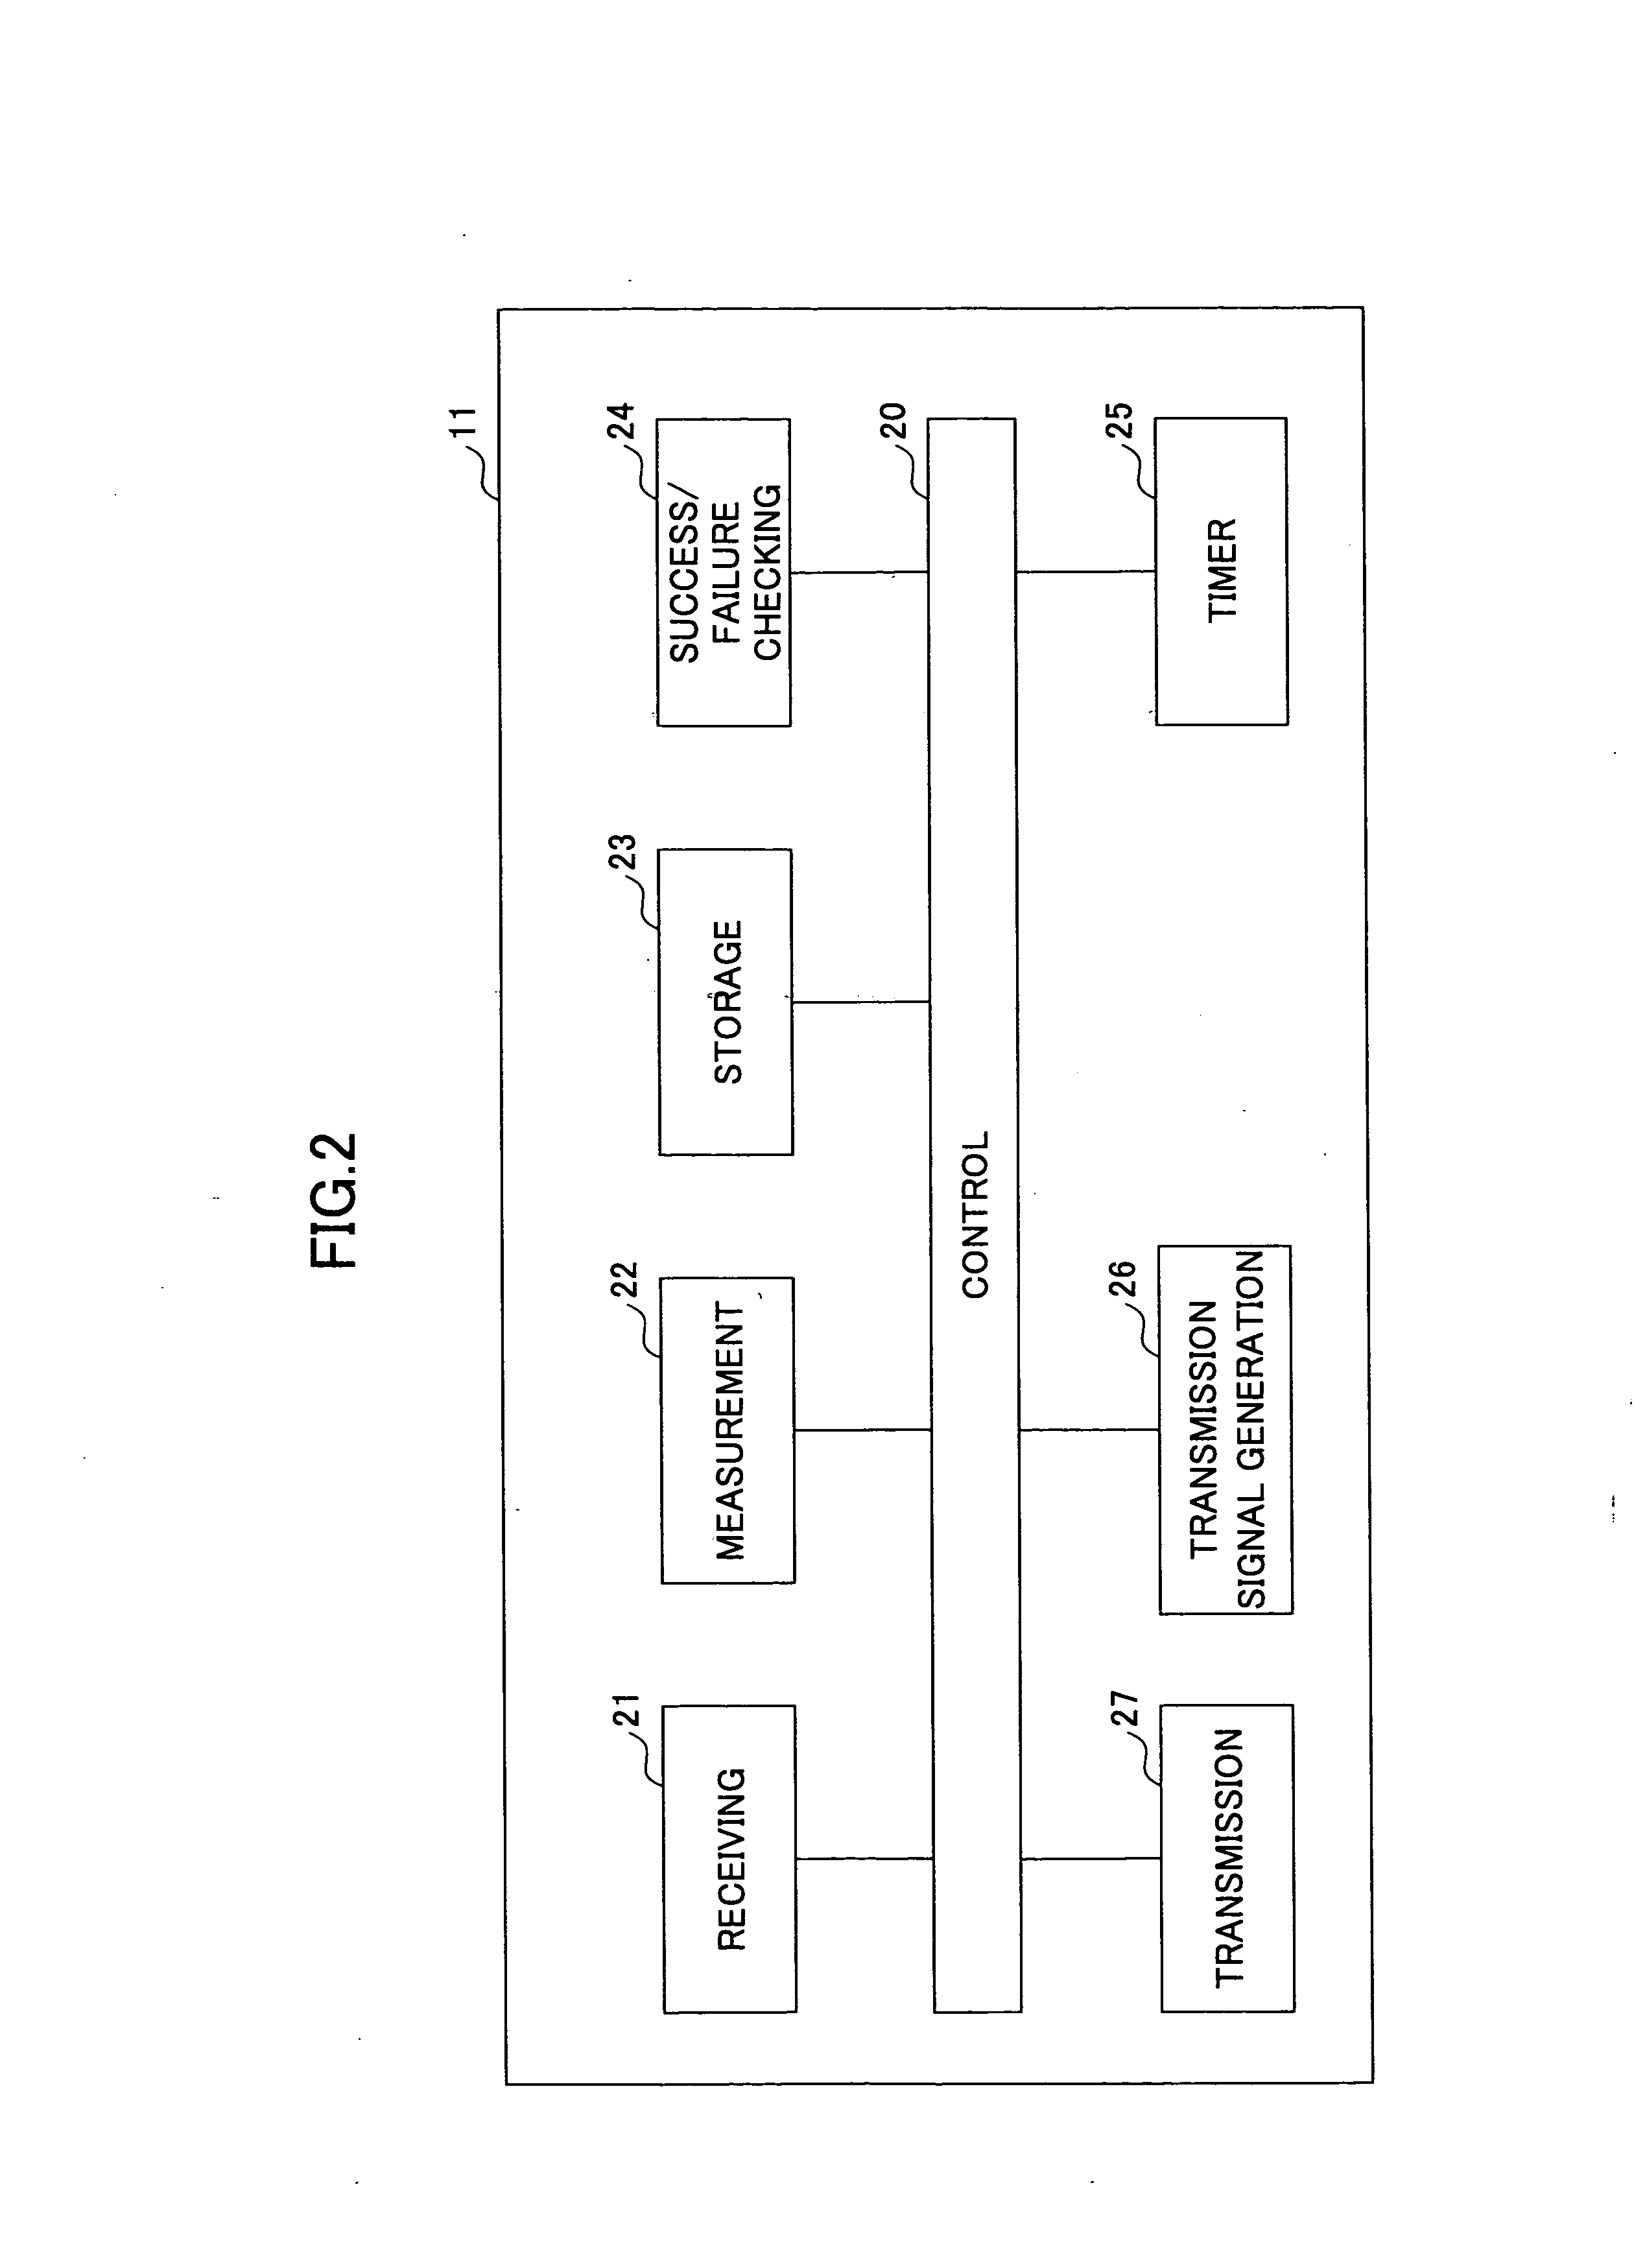 User apparatus and method in mobile communication system